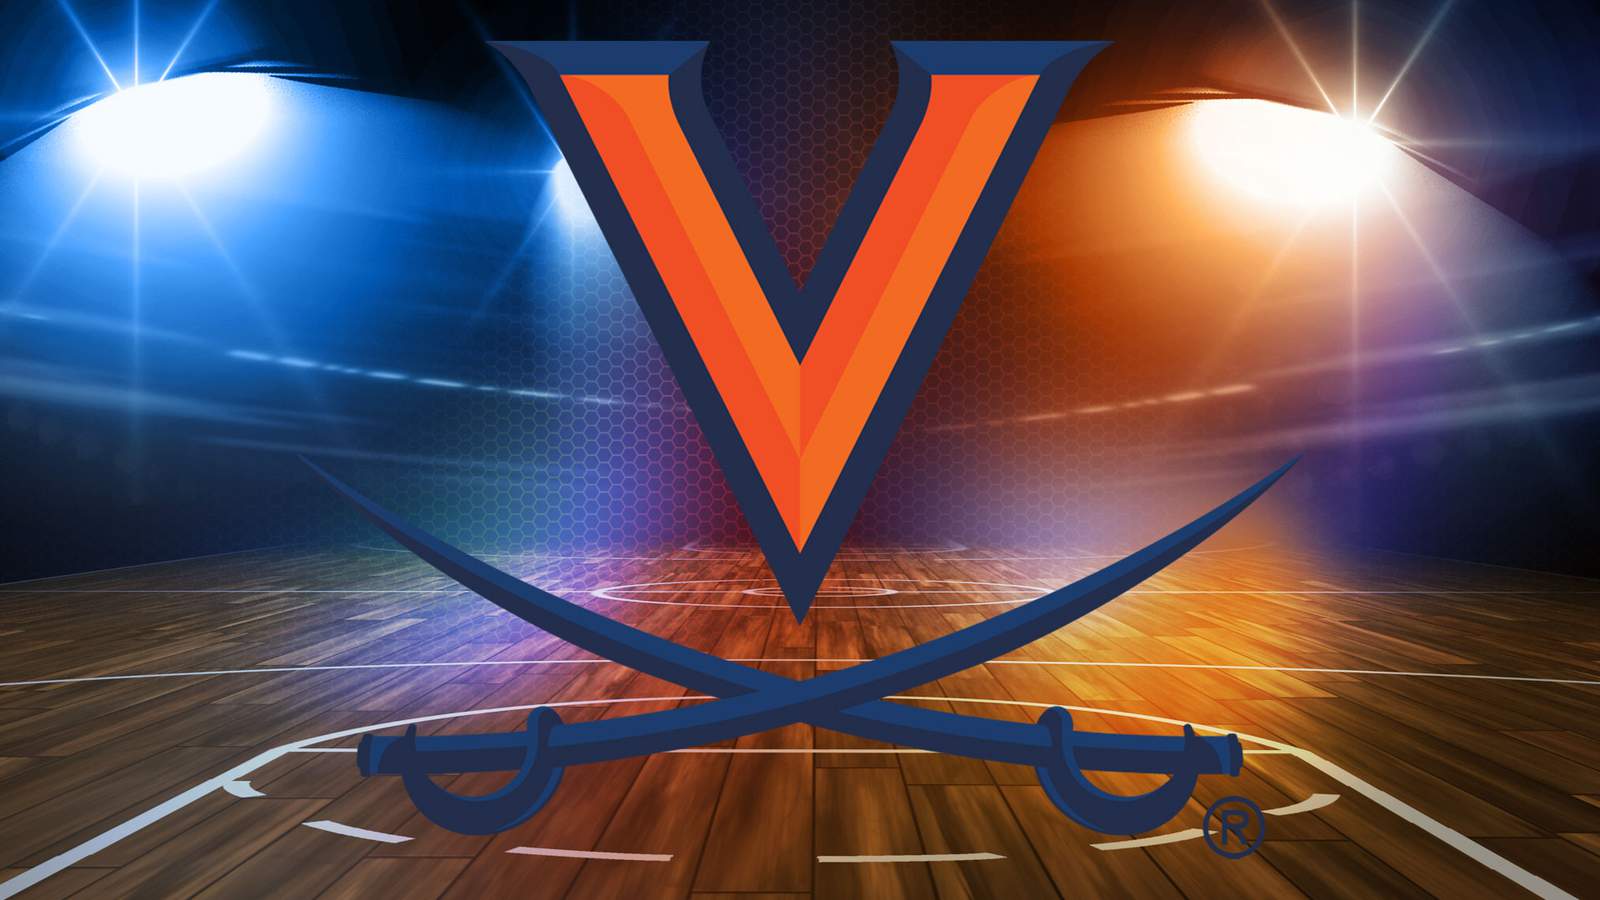 Virginia women’s basketball team cancels rest of 2020-21 season due to COVID-19 concerns